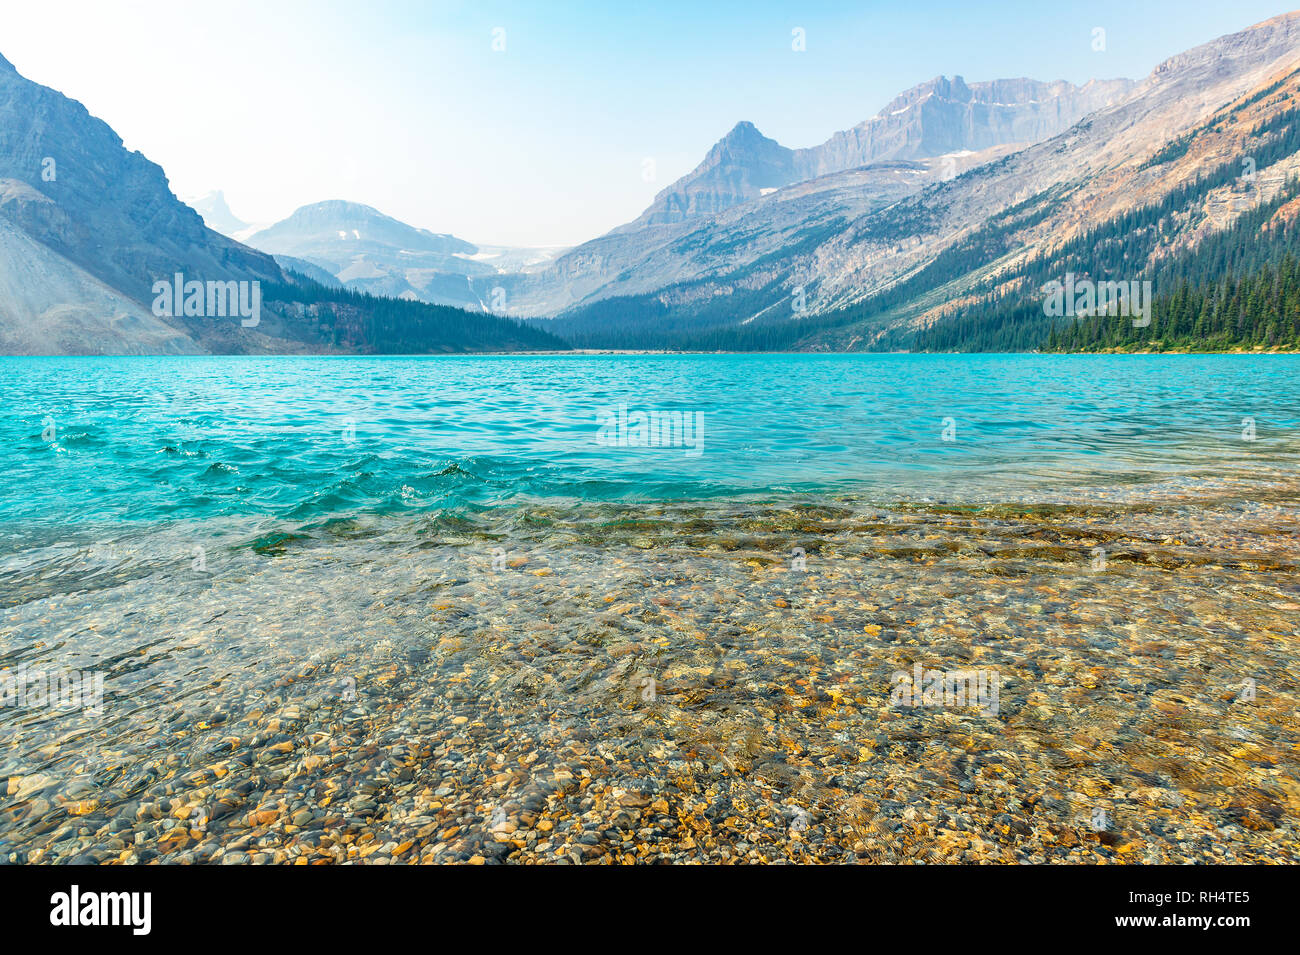 The magnificent turquoise glacier waters of Lake Louise mingling with pure transparent river waters in Banff National Park, Alberta, Canada. Stock Photo